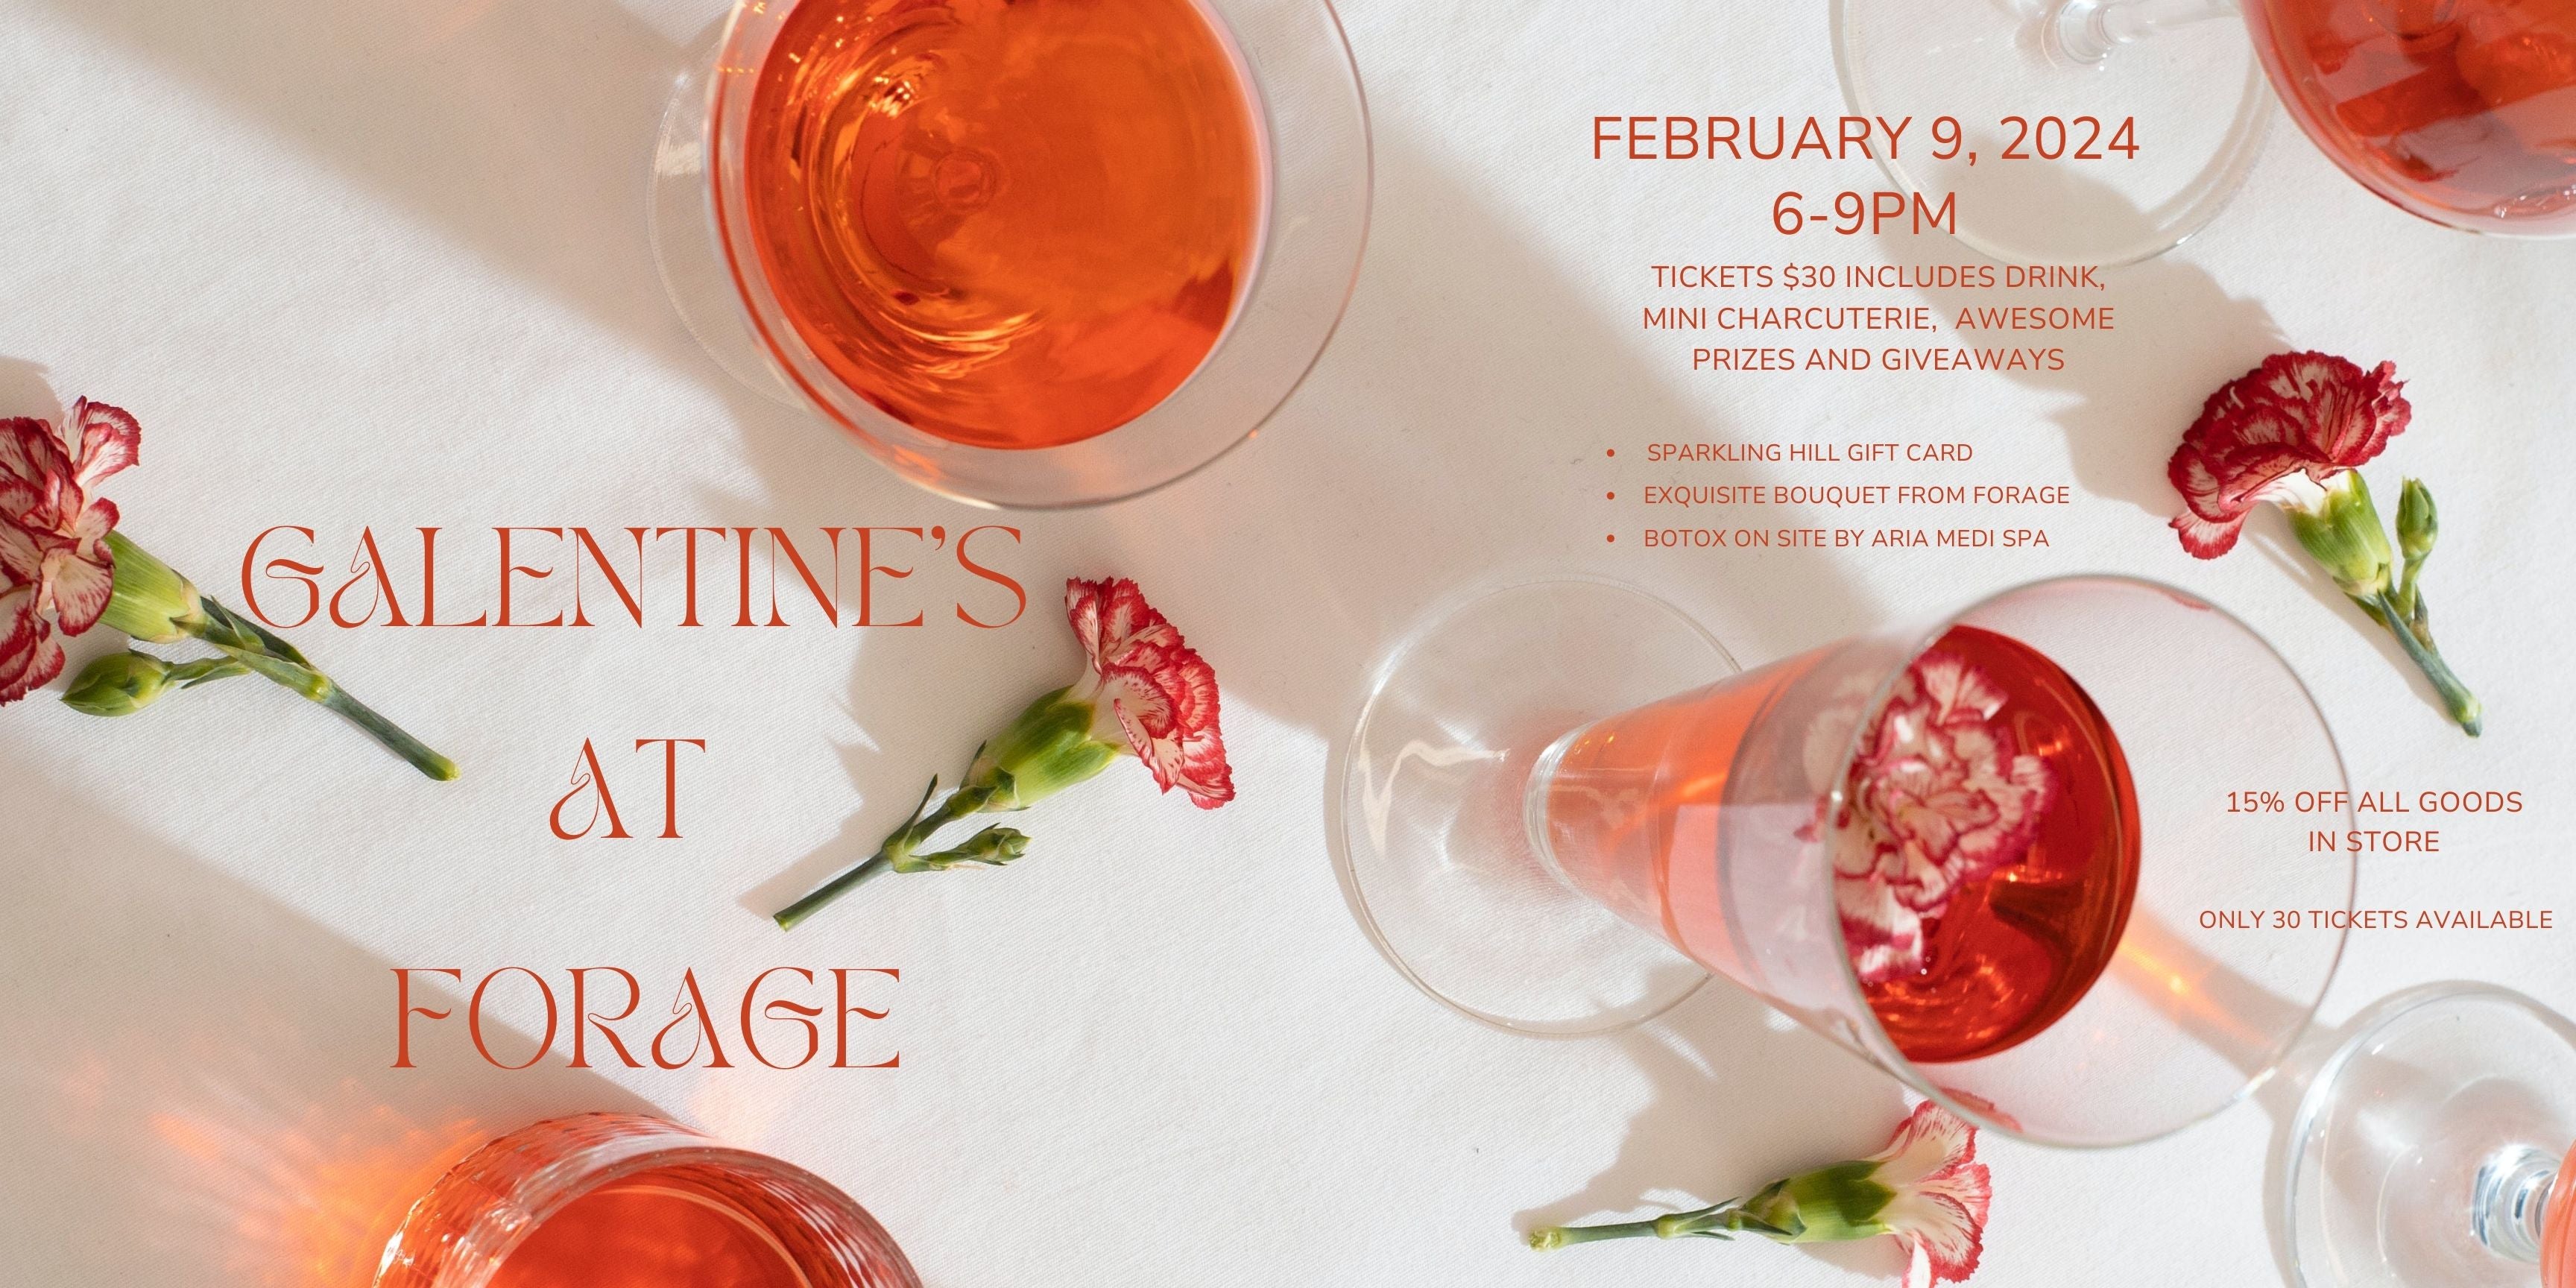 Galentine's At Forage Event February 9